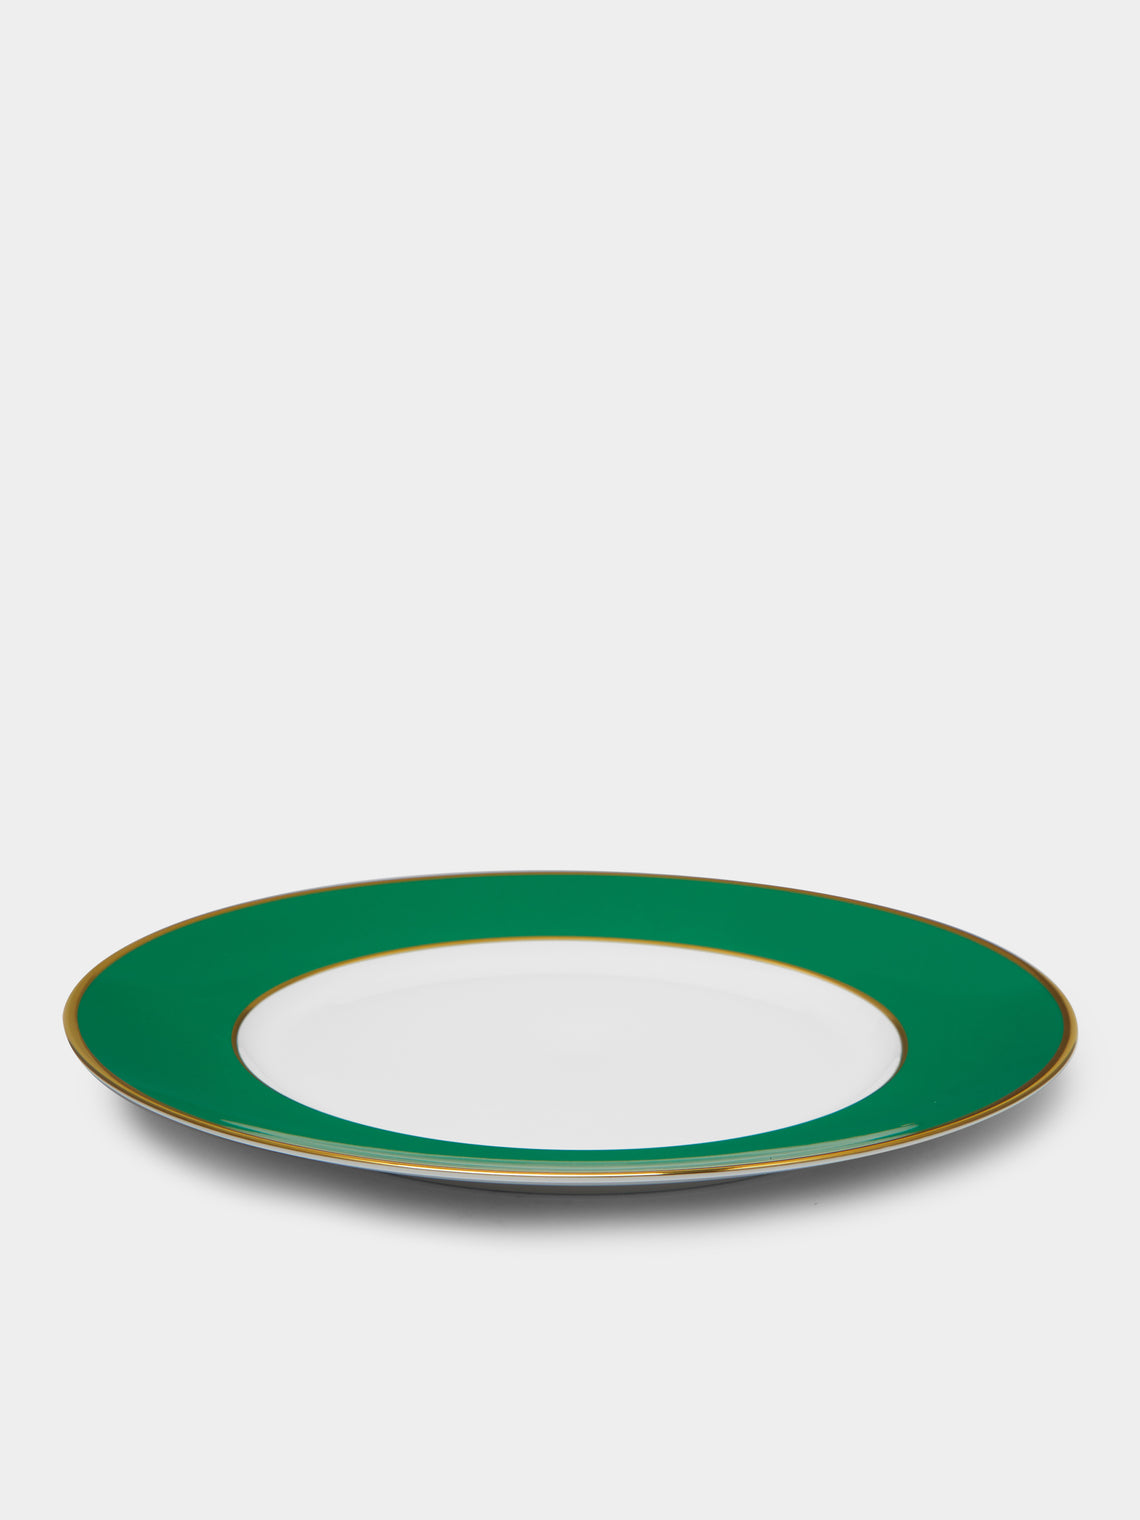 Augarten - Hand-Painted Porcelain Charger Plate -  - ABASK